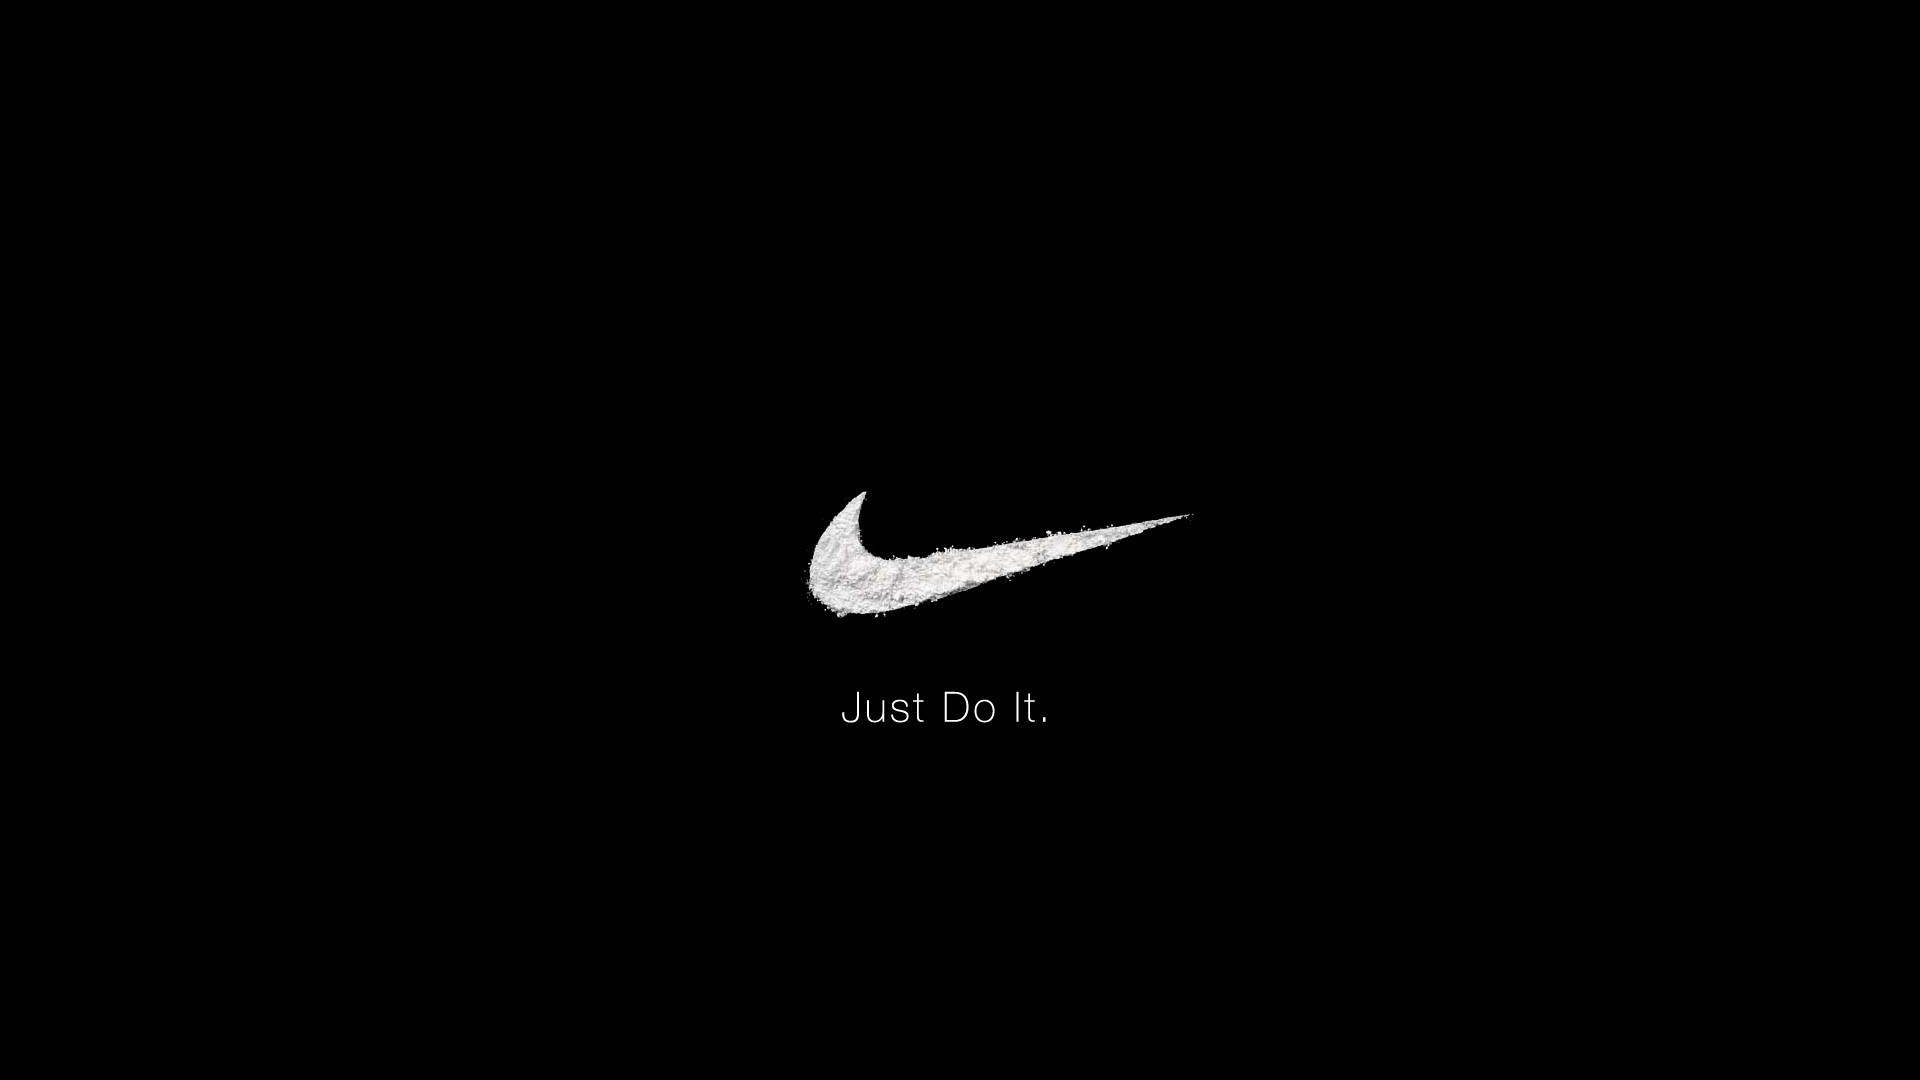 Nike wallpapers full hd just do it